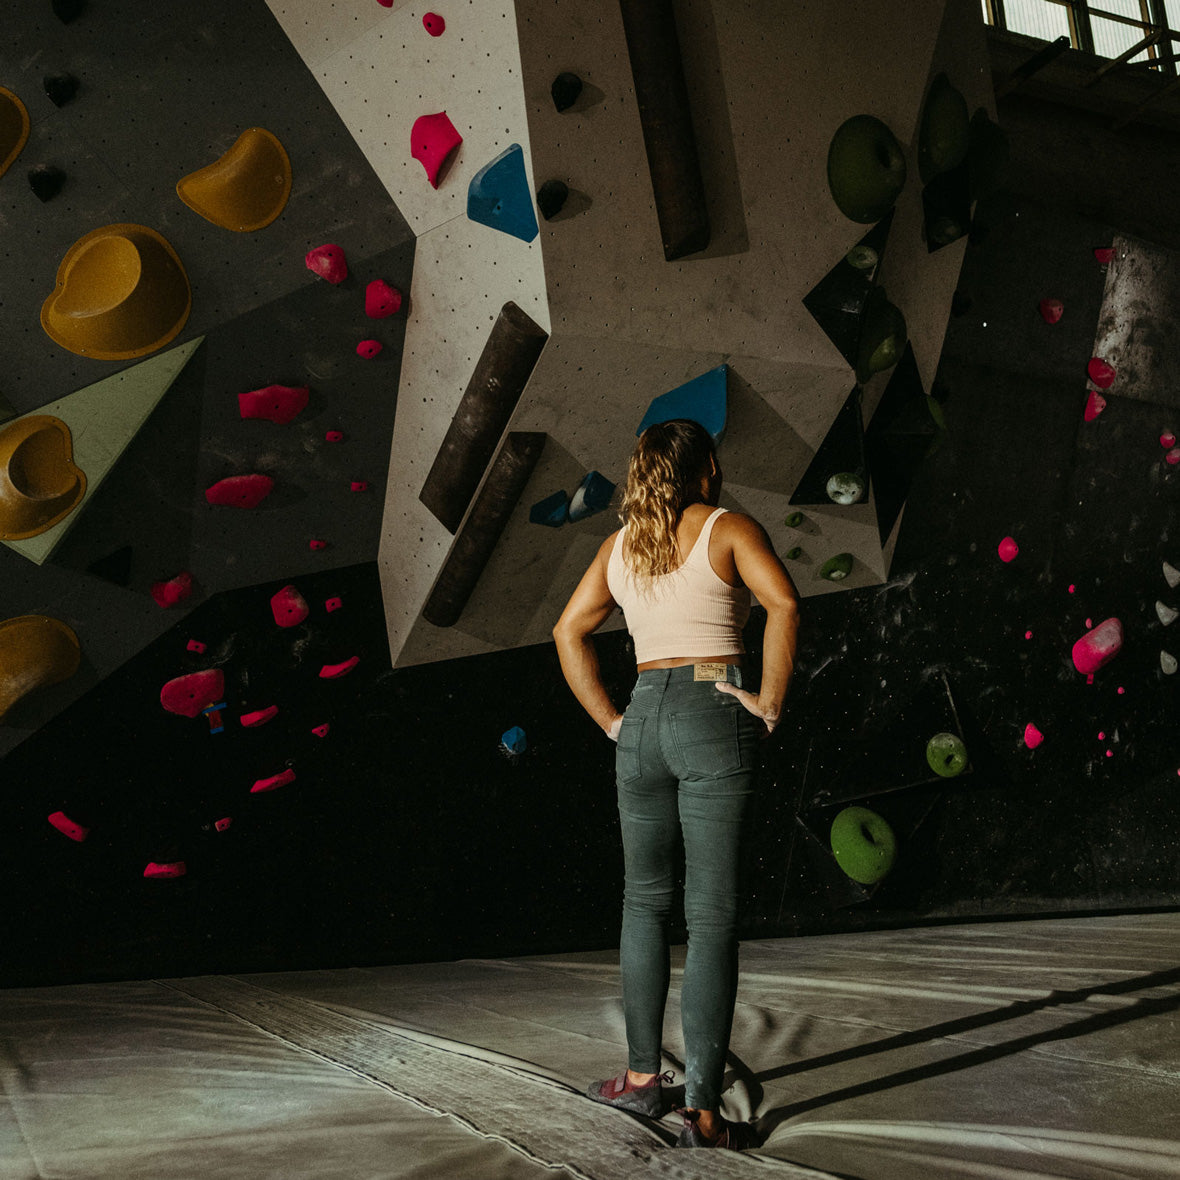 Meagan Martin looks at a climbing wall while wearing the so ill forest denim and new zero pro climbing shoes